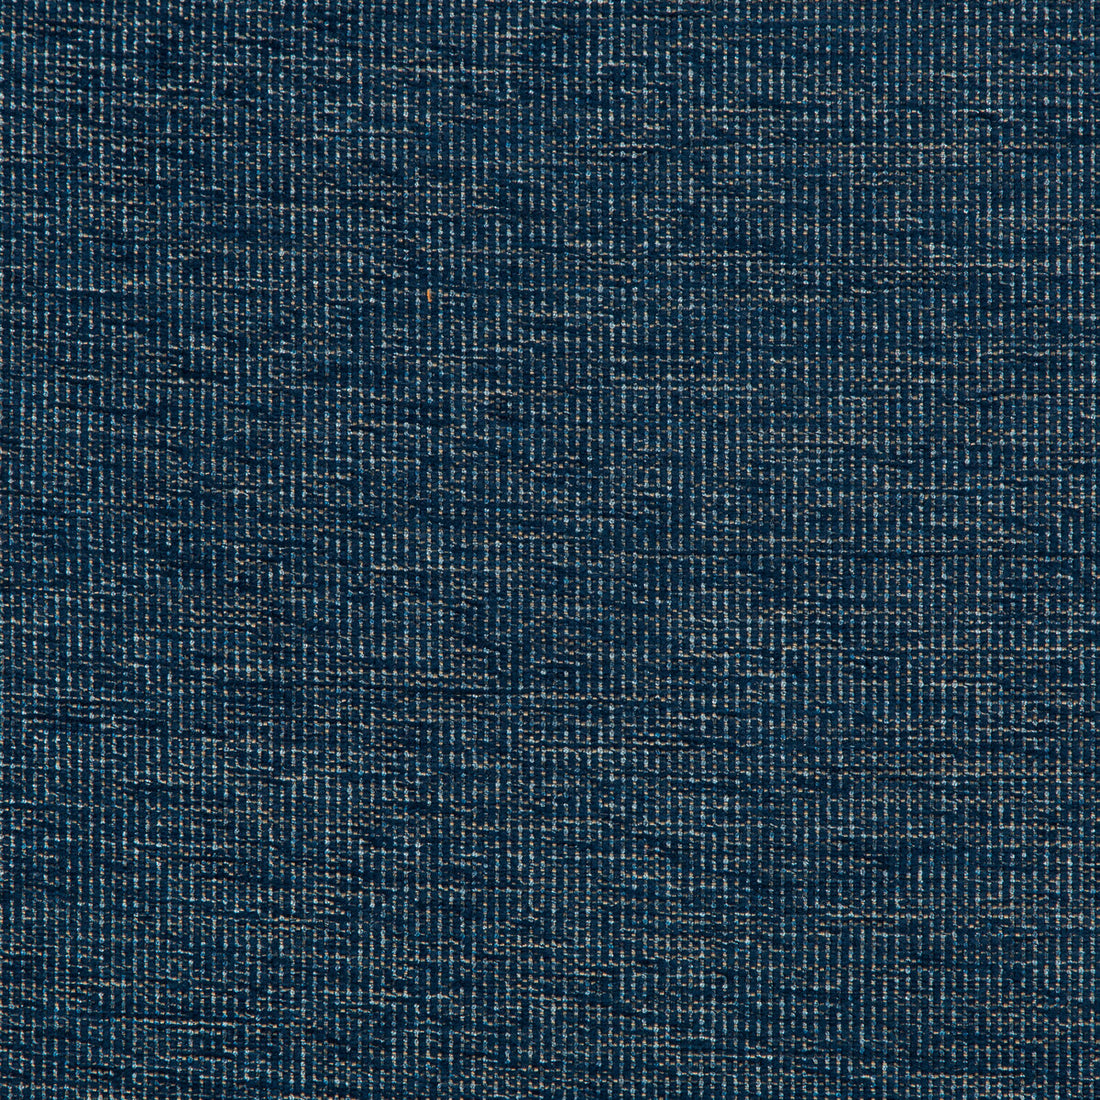 Kravet Design fabric in 36093-50 color - pattern 36093.50.0 - by Kravet Design in the Inside Out Performance Fabrics collection